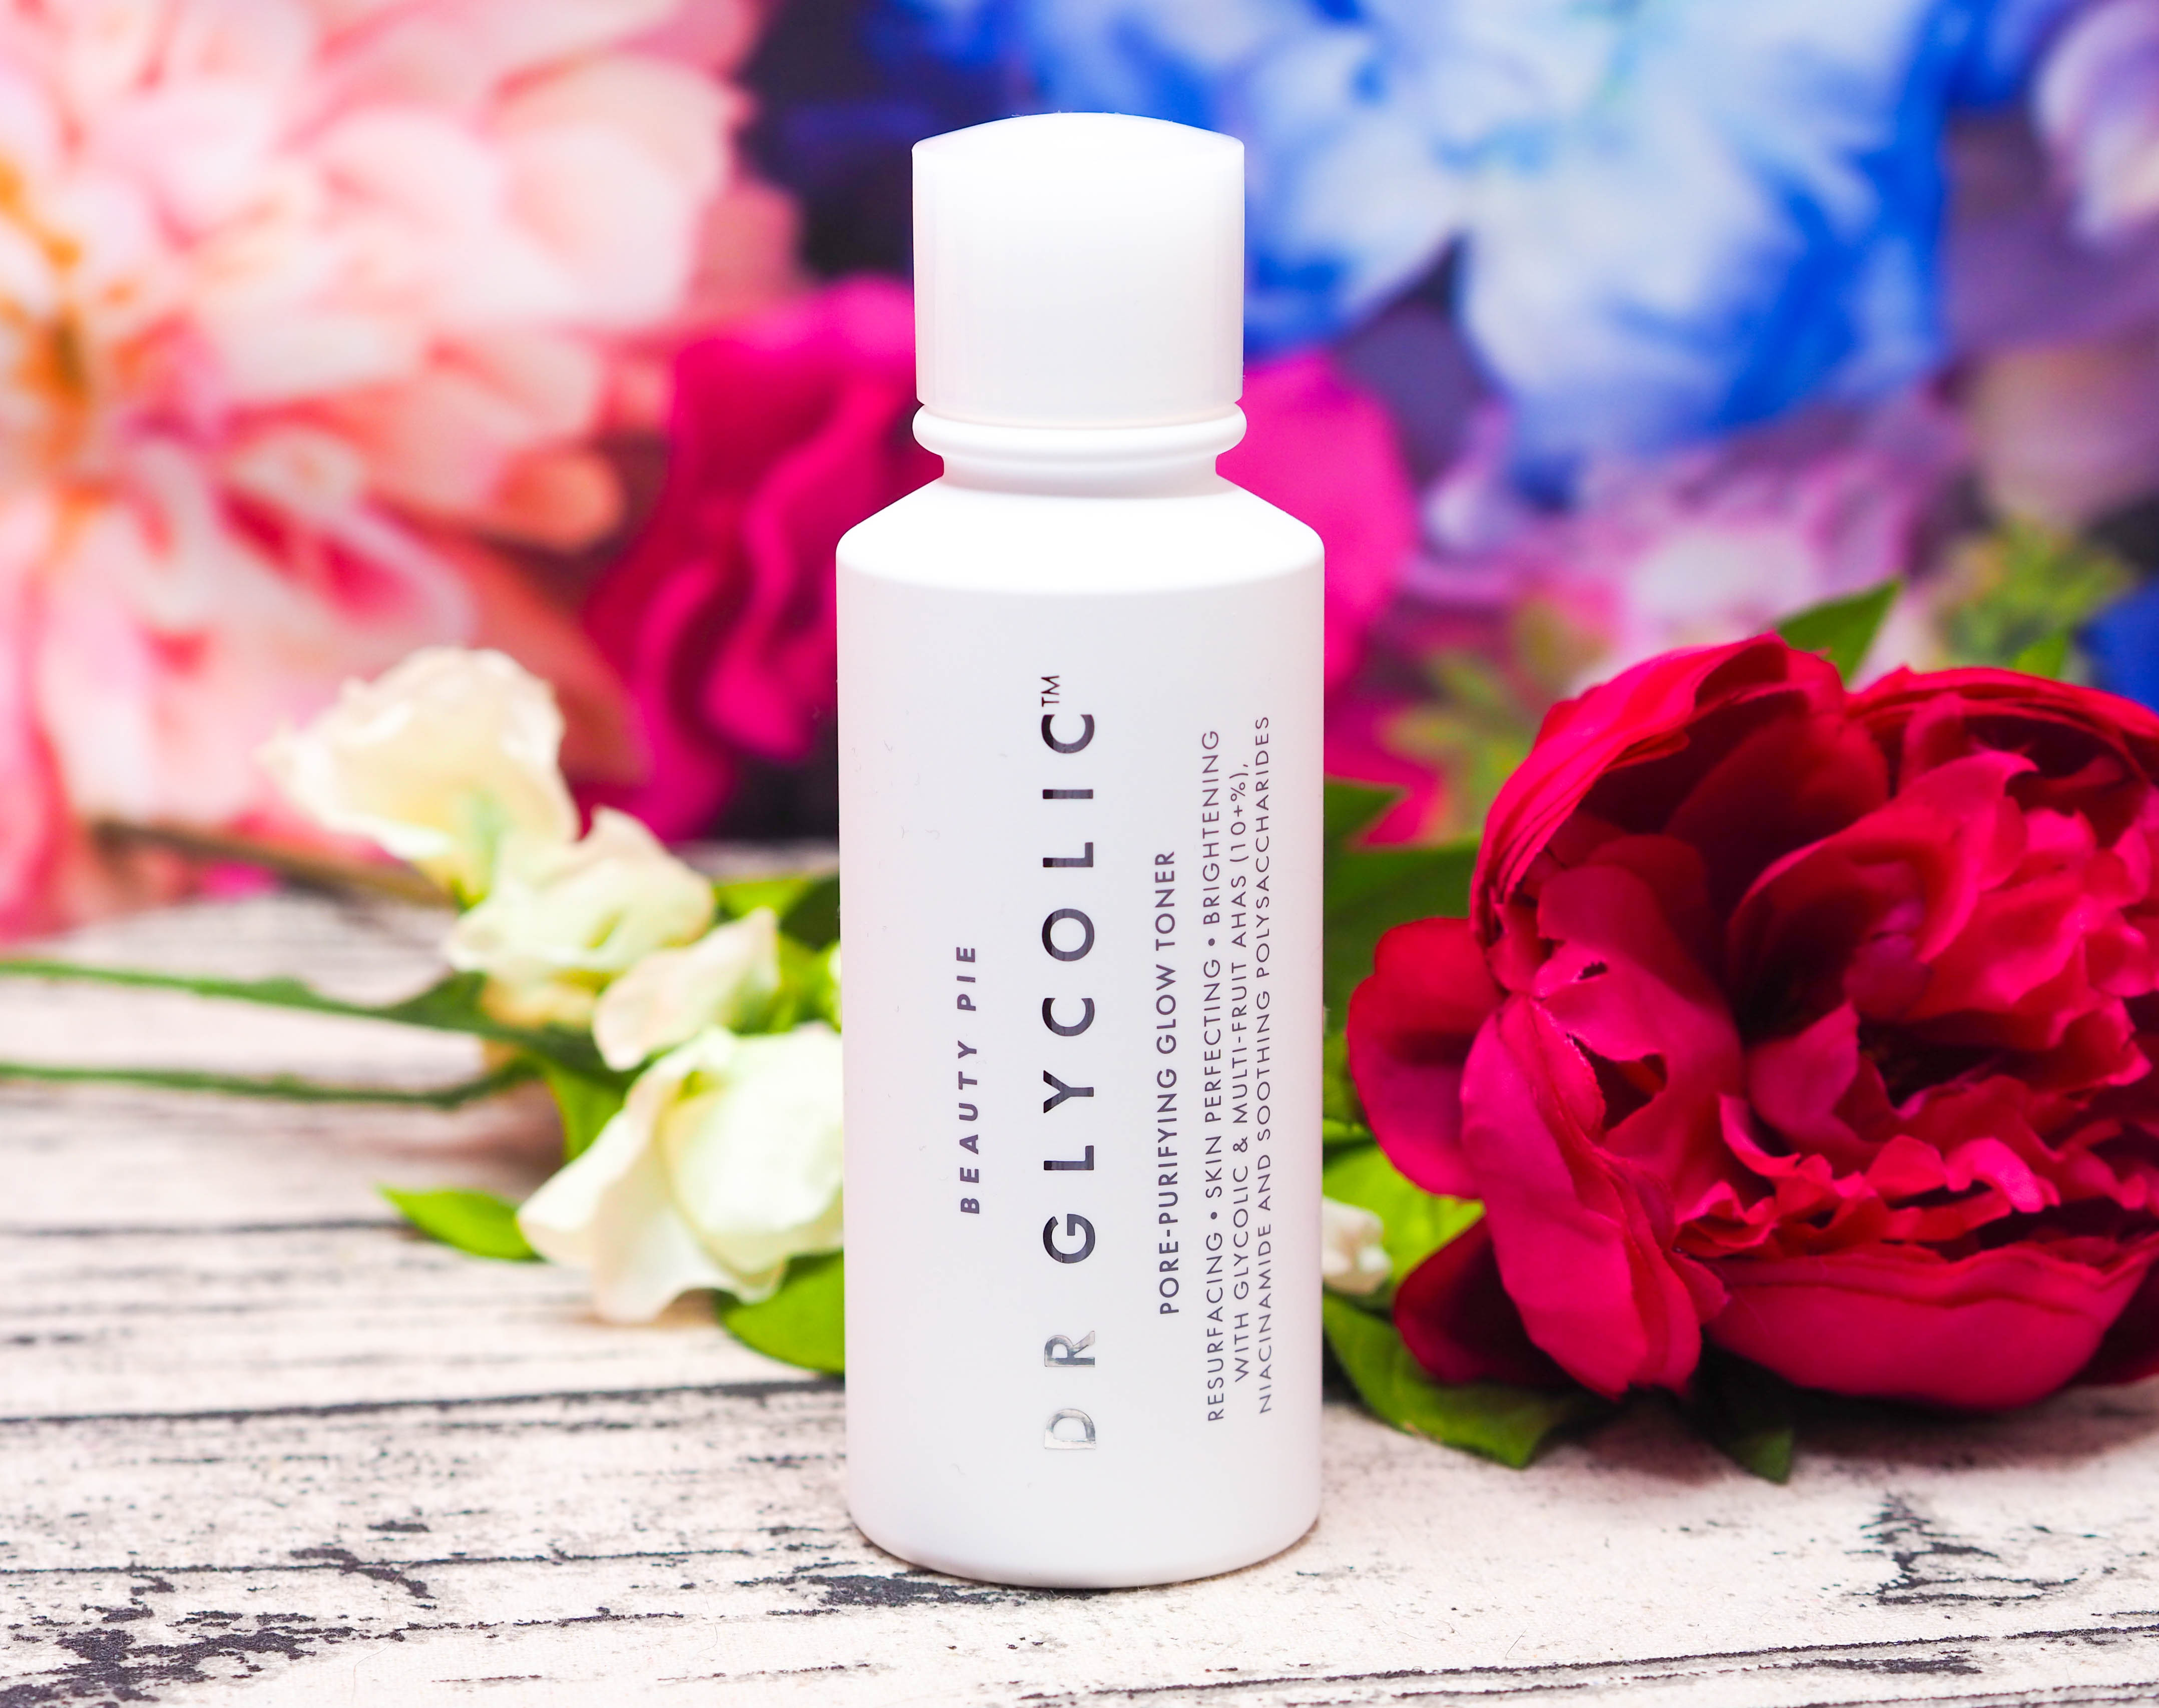 Beauty Pie Dr Glycolic Skin Perfecting Glow Toner Review